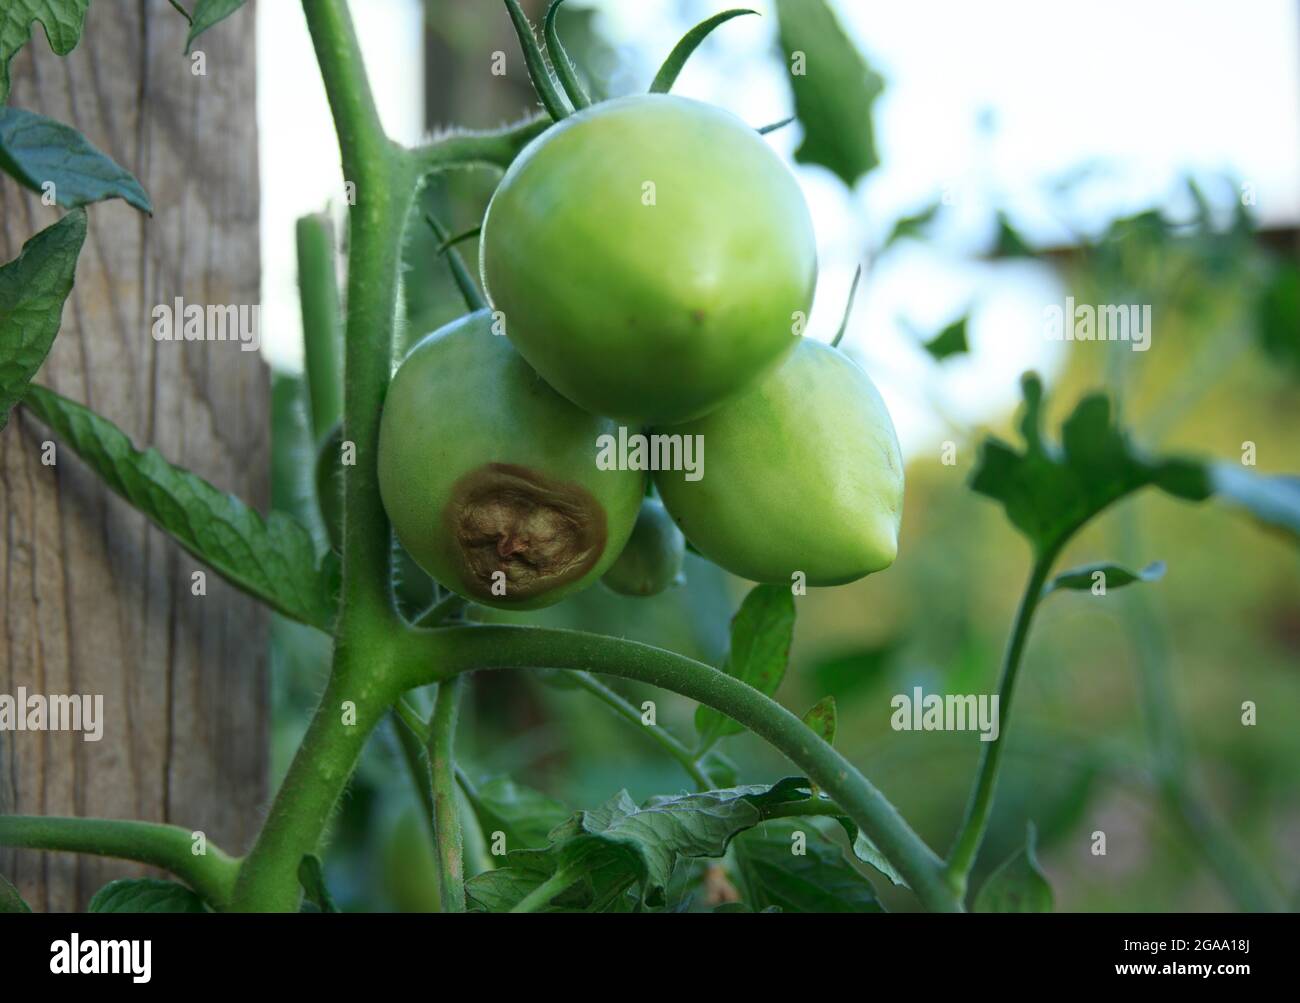 Disease of tomatoes. Blossom end rot. Three green tomatoes are rotten on the bush. Close-up. Crop problems. Blurred agricultural background Stock Photo